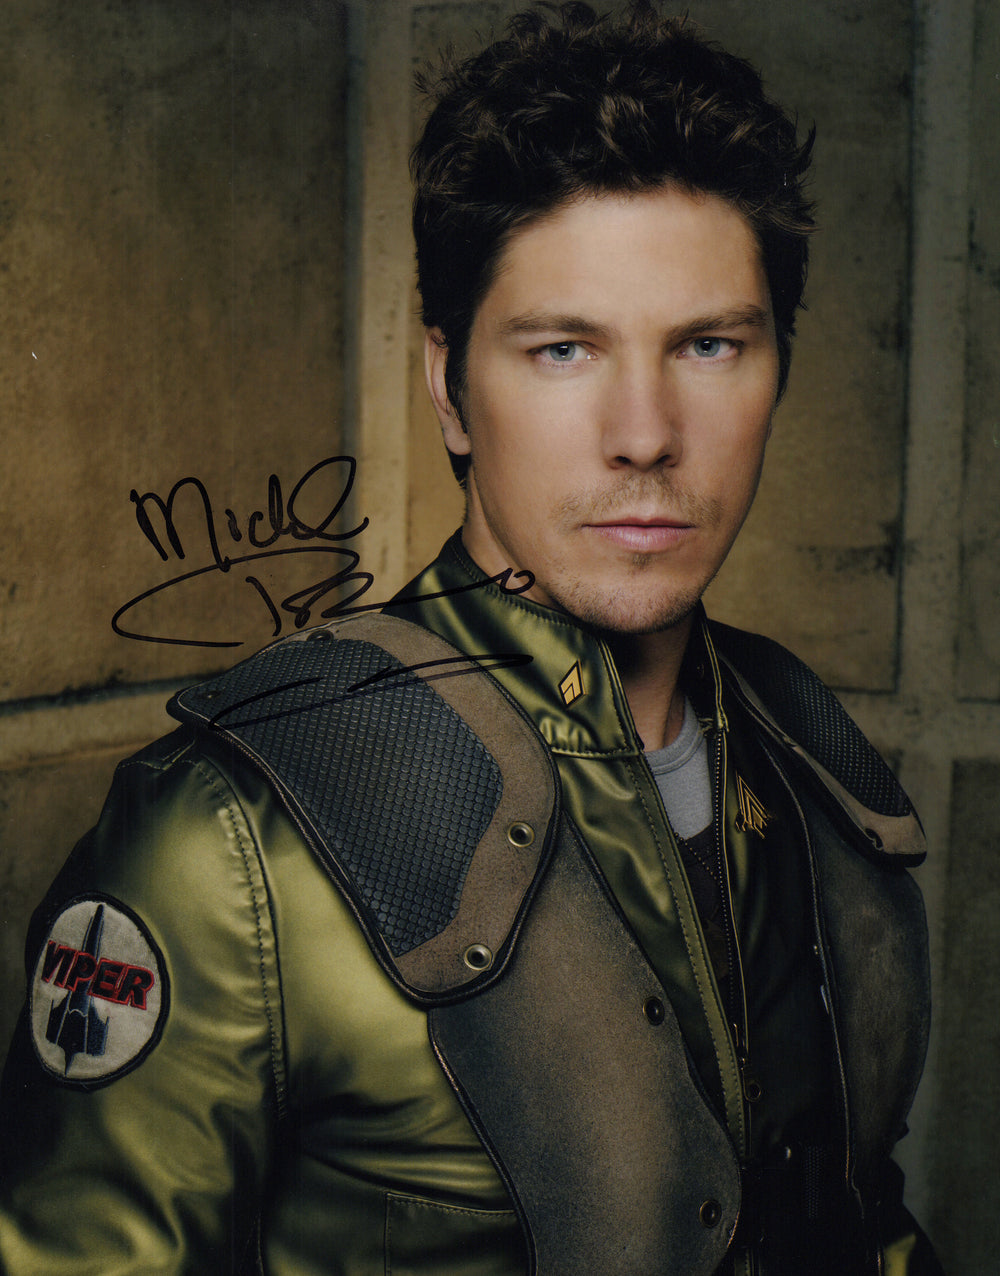 Michael Trucco as Samuel Anders in Battlestar Galactica Signed 11x14 Photo